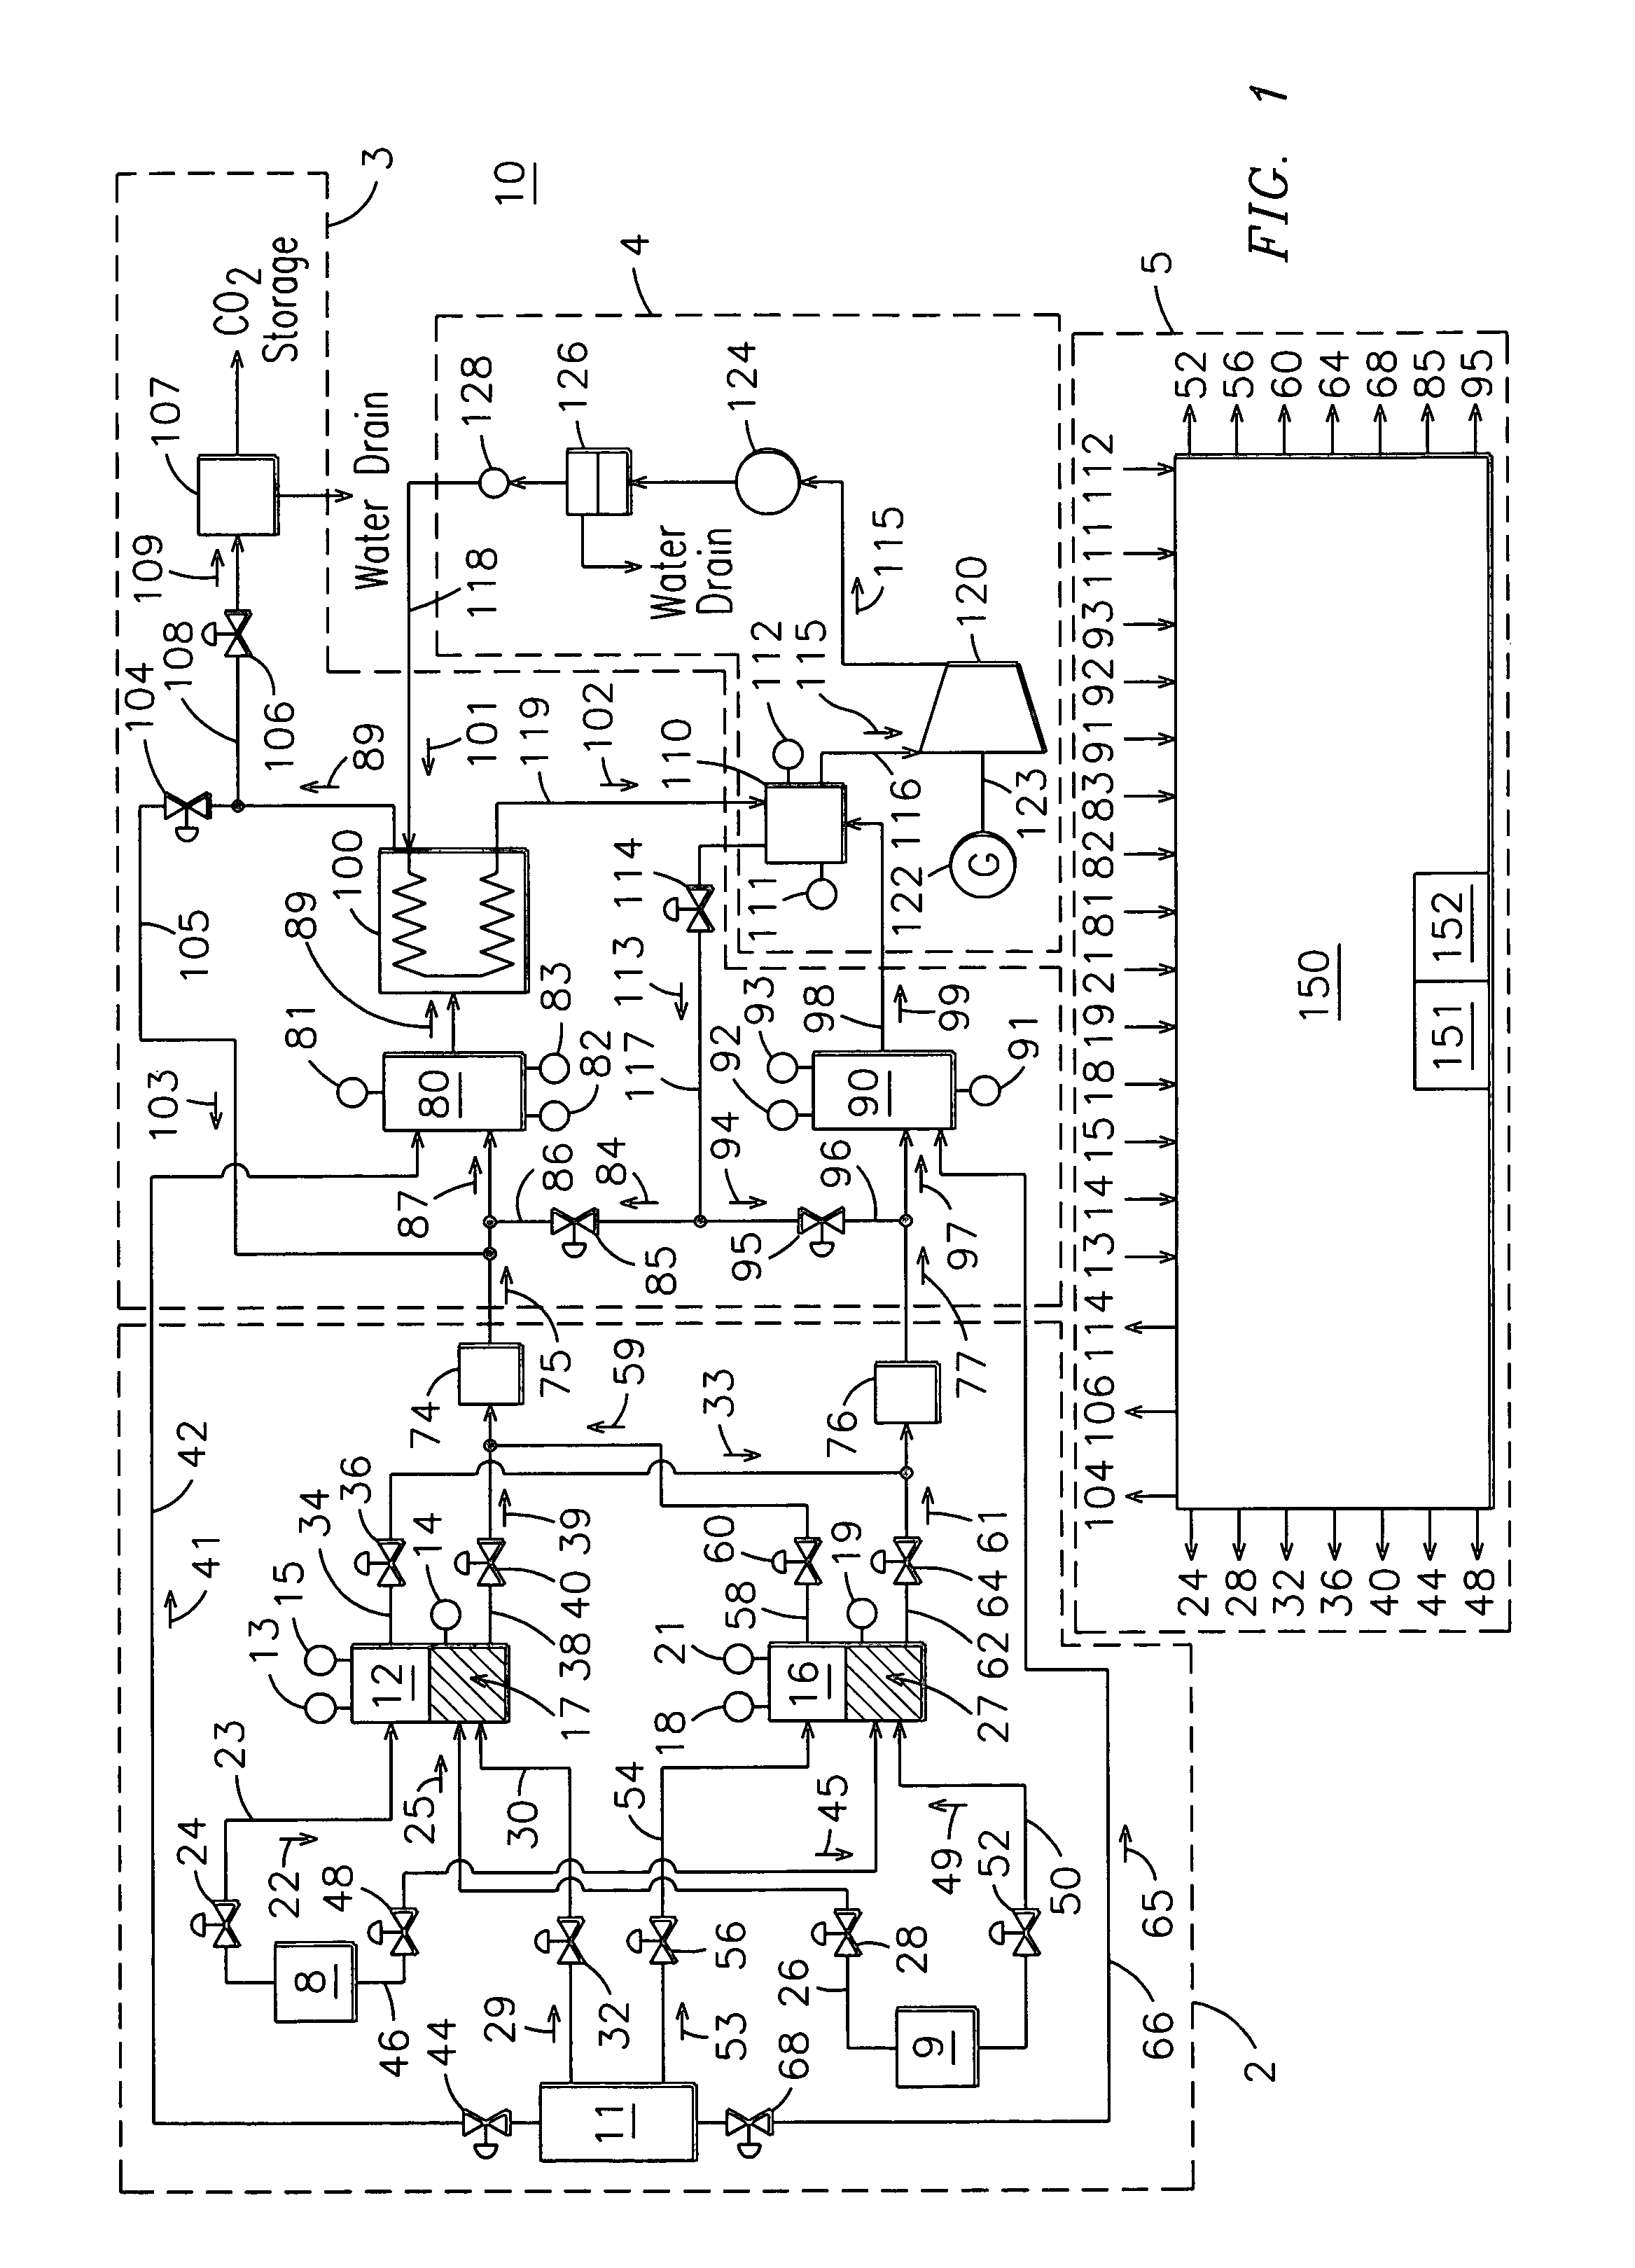 System and method employing direct gasification for power generation